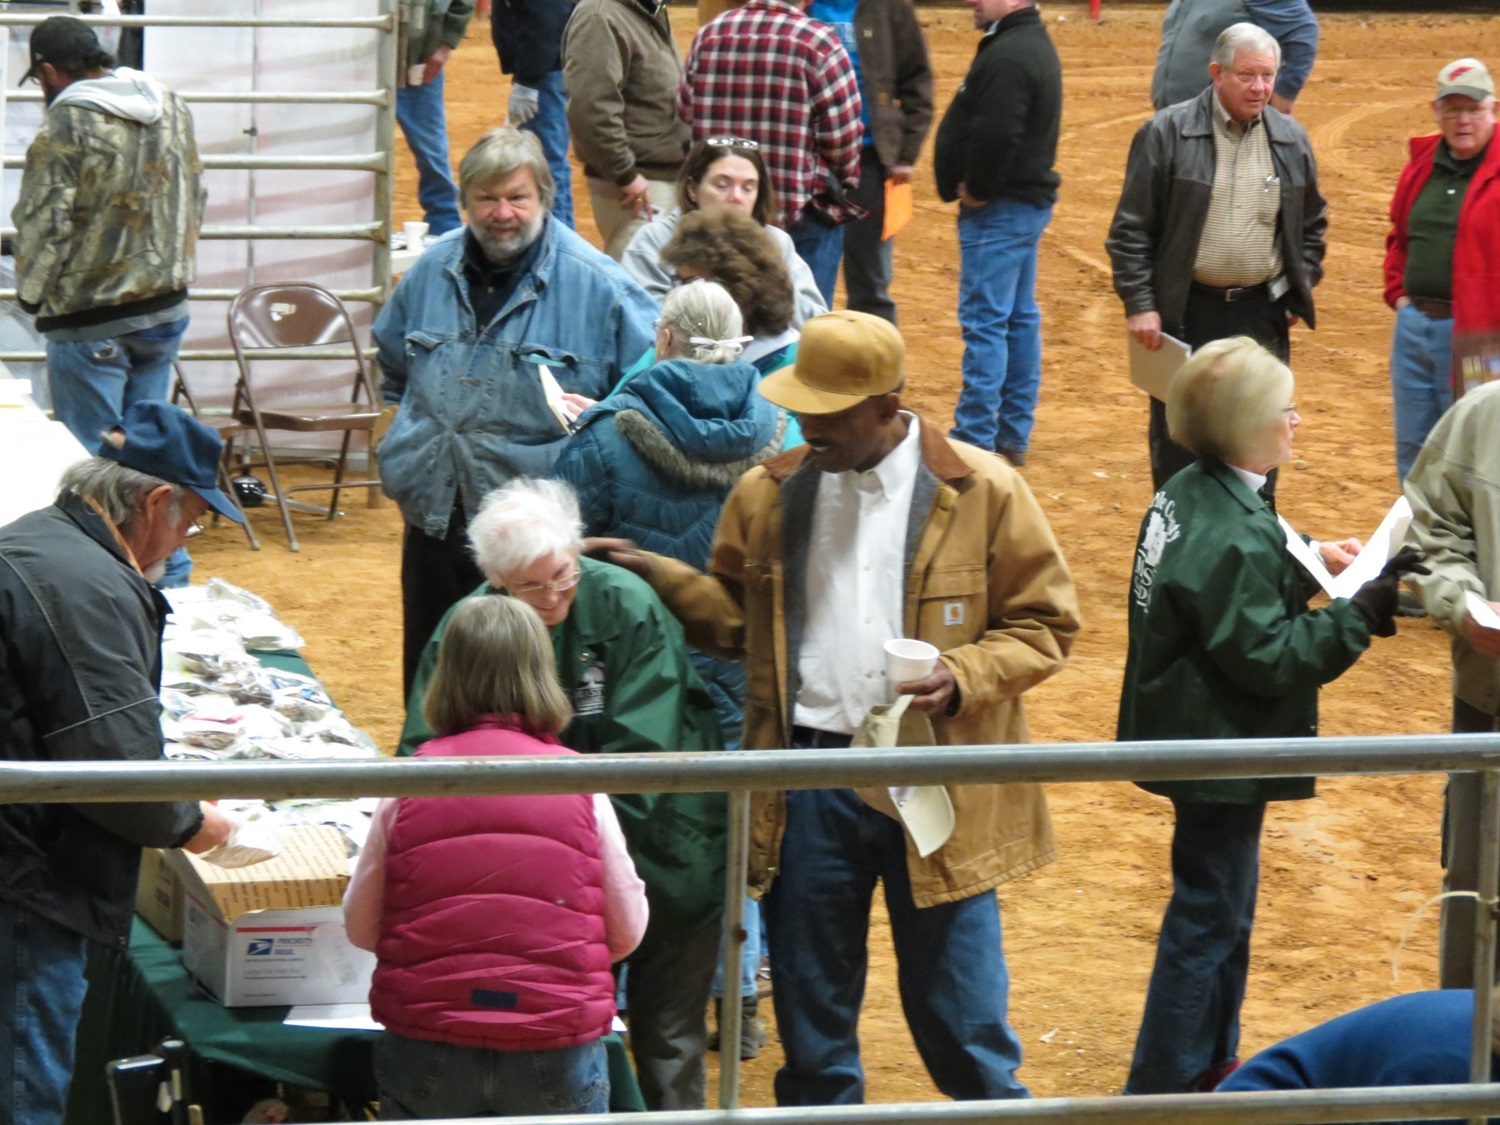 2014 Ag Expo participants viewing exhibits and attending classes